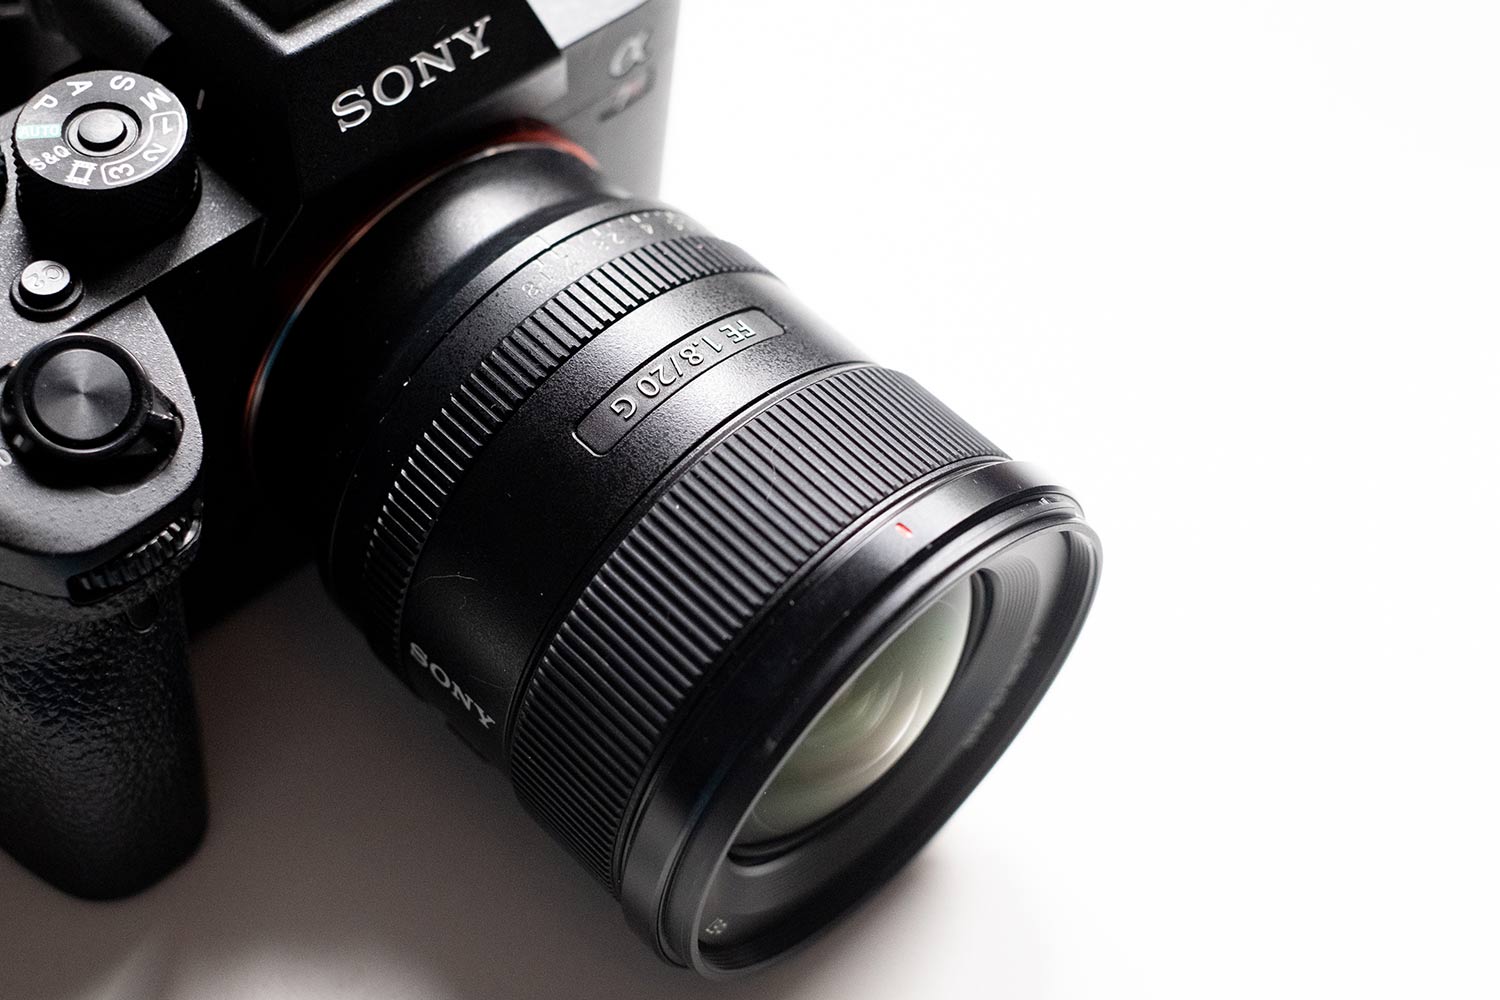 First shots with Sony's FE 20mm F1.8 G wide-angle prime lens